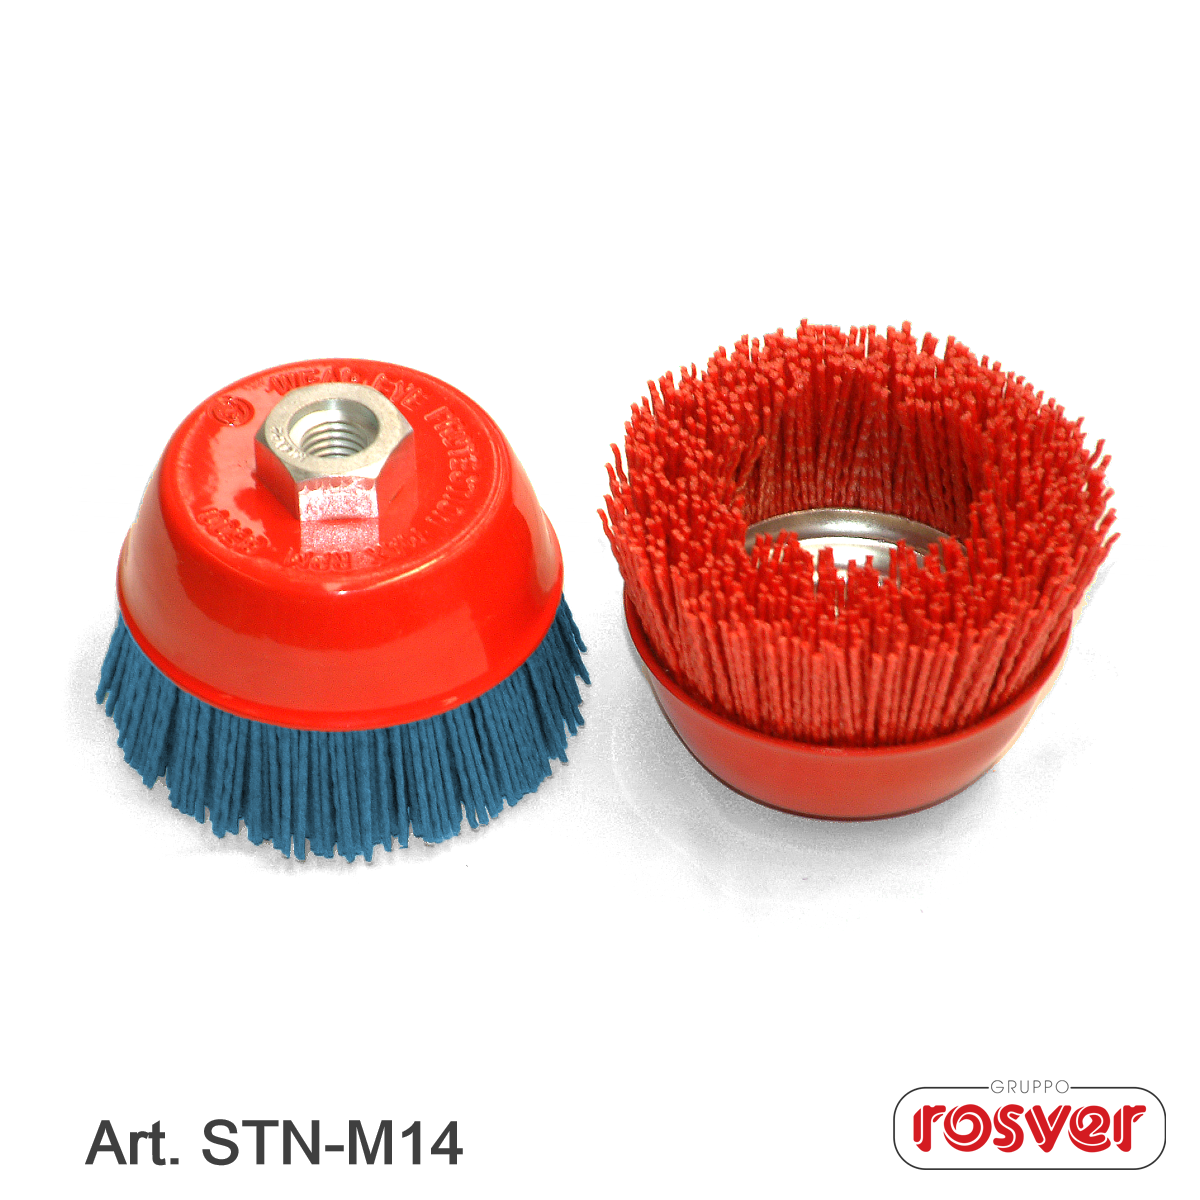 Nylon Cup Brushes M14 - Rosver - STN D.100 F.M14 - Conf.1pz